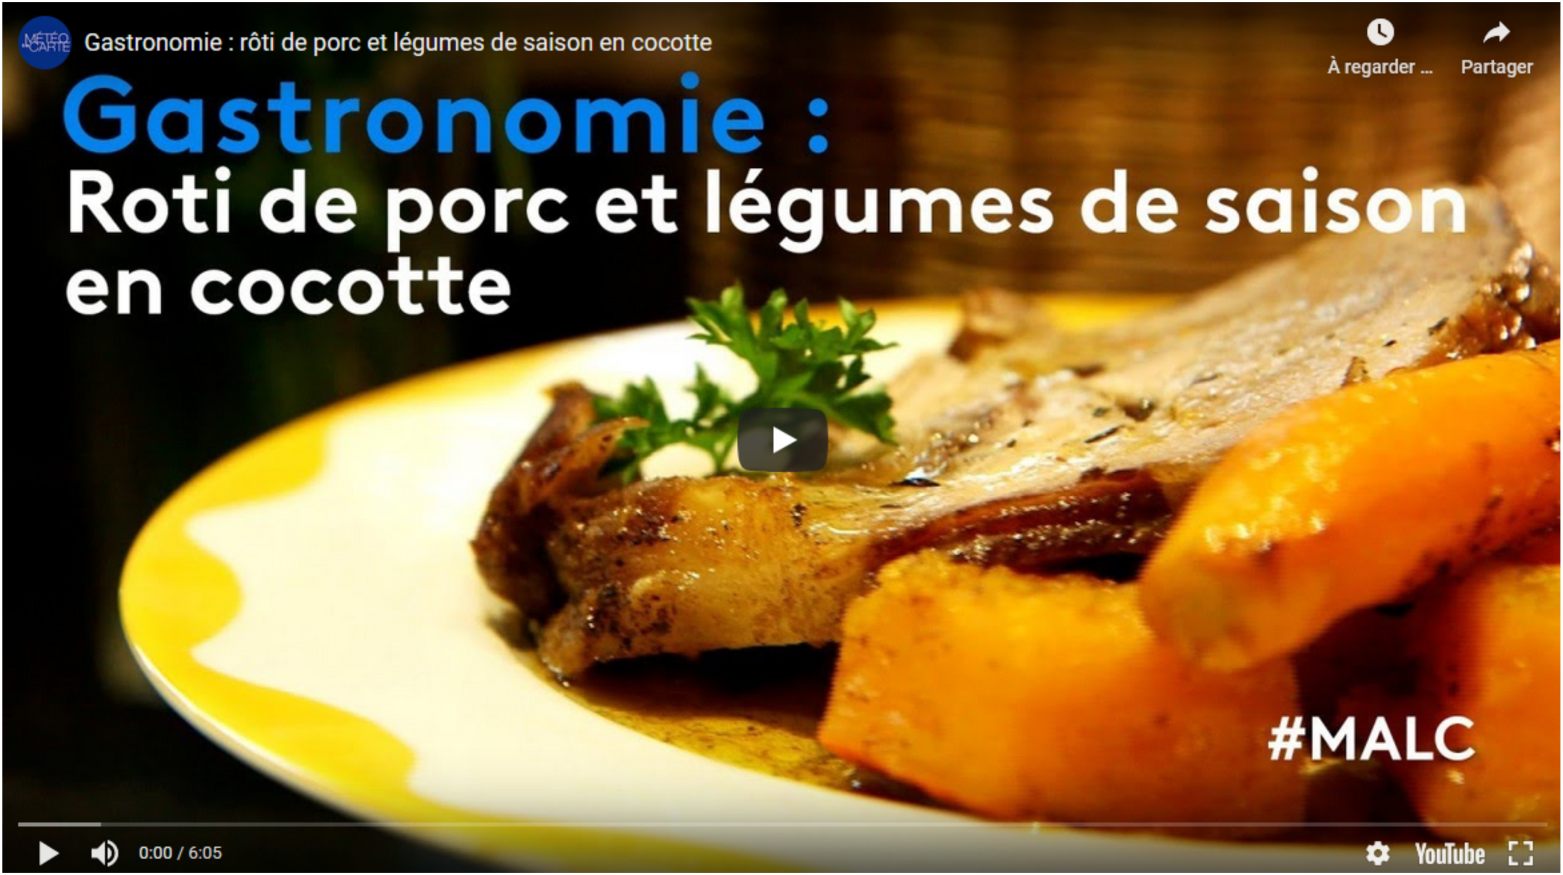 Thierry the Chef of Manoir Beuregard makes us discover his roast pork and his seasonal vegetables in a casserole dish offered at his table d'hôtes